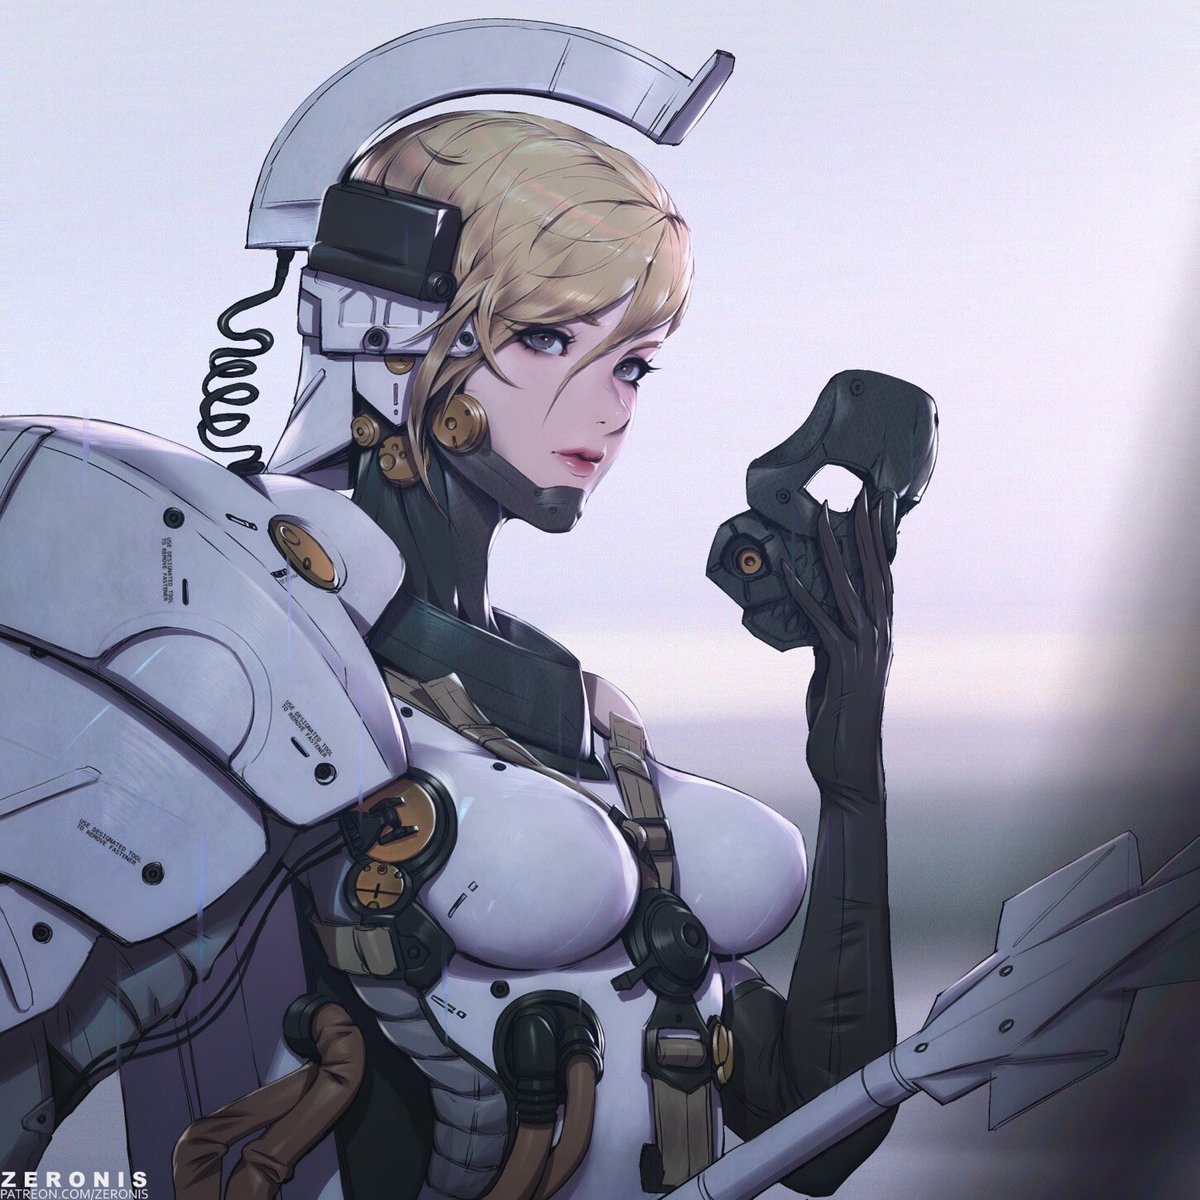 værksted Pearly kedelig ZERO / zeronis on Twitter: "Female Ludens fan art for @KojiPro2015_EN  @Kojima_Hideo @HIDEO_KOJIMA_EN this is a mascot of his, female version. I  cannot wait to play his new game Death Stranding! https://t.co/E38rUk7LRR" /